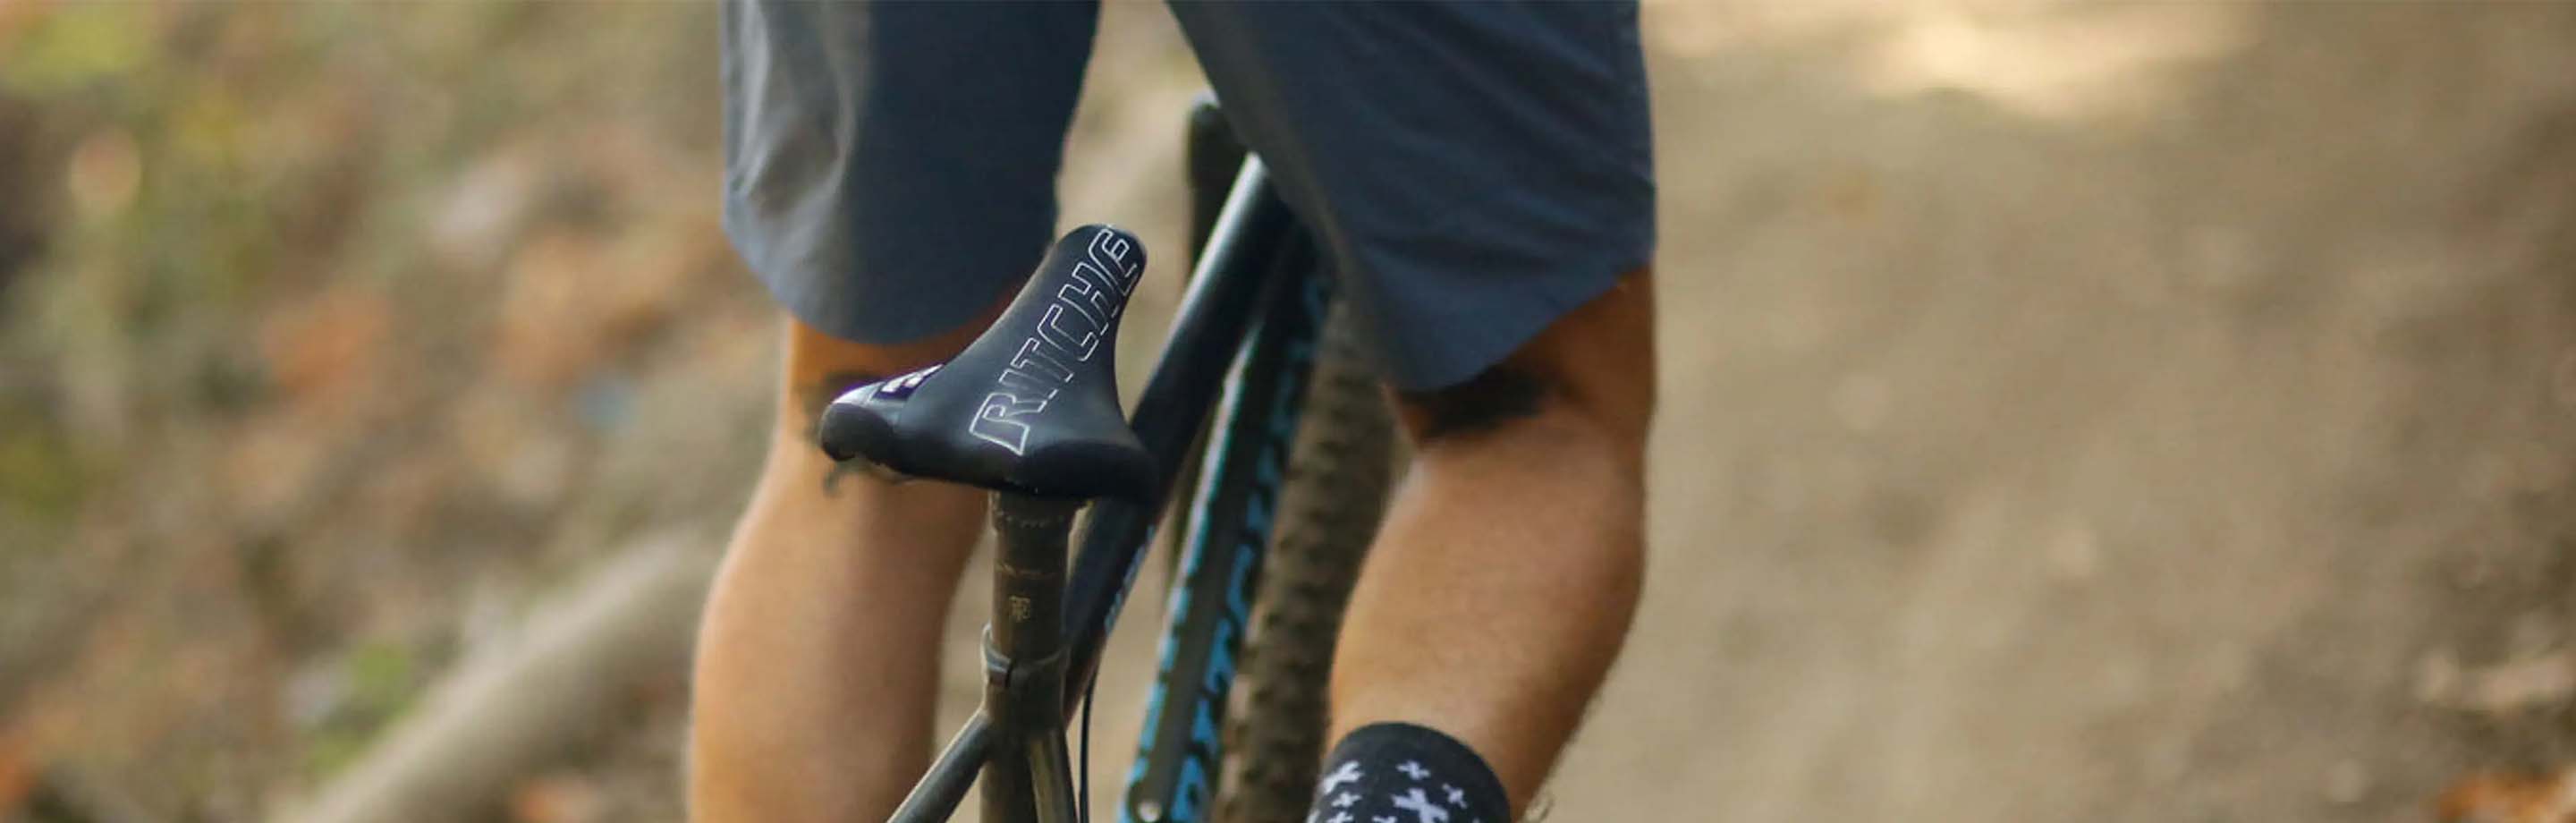 An MTB saddle for optimum contact with the bike.